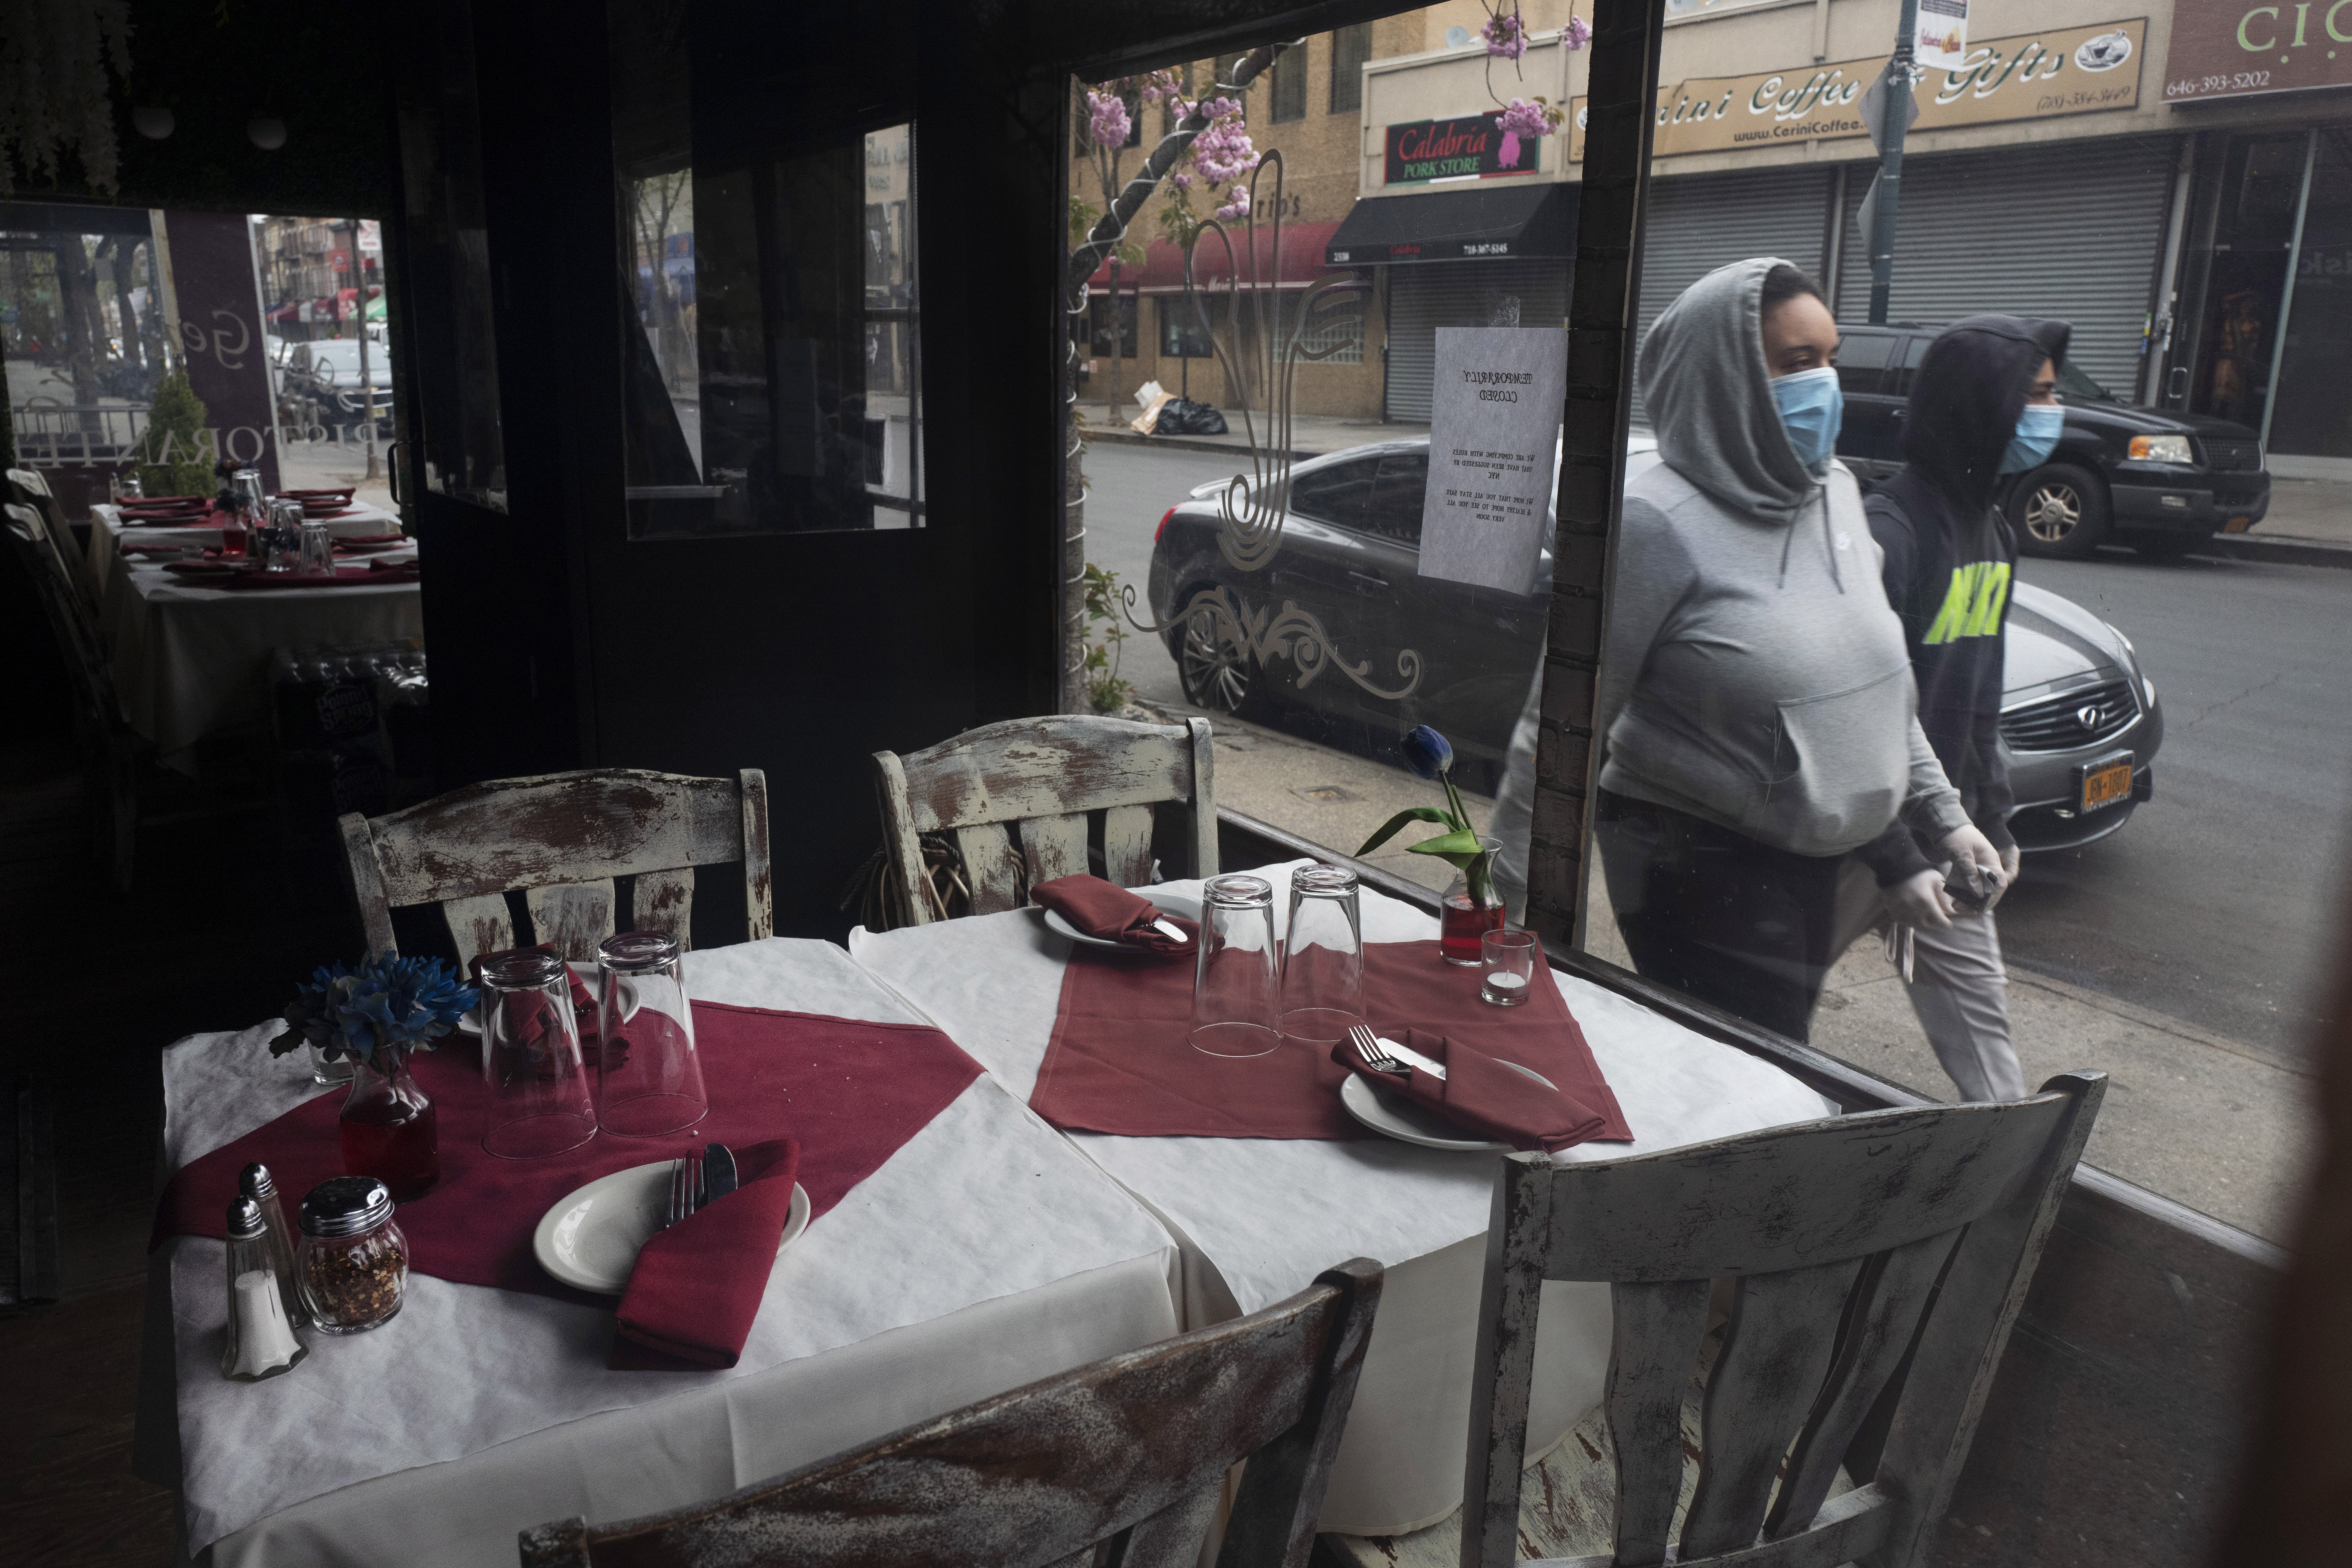 San Gennaro restaurant is closed but the tables are set in the Bronx borough of New York on Friday, April 17, 2020, during the coronavirus pandemic.